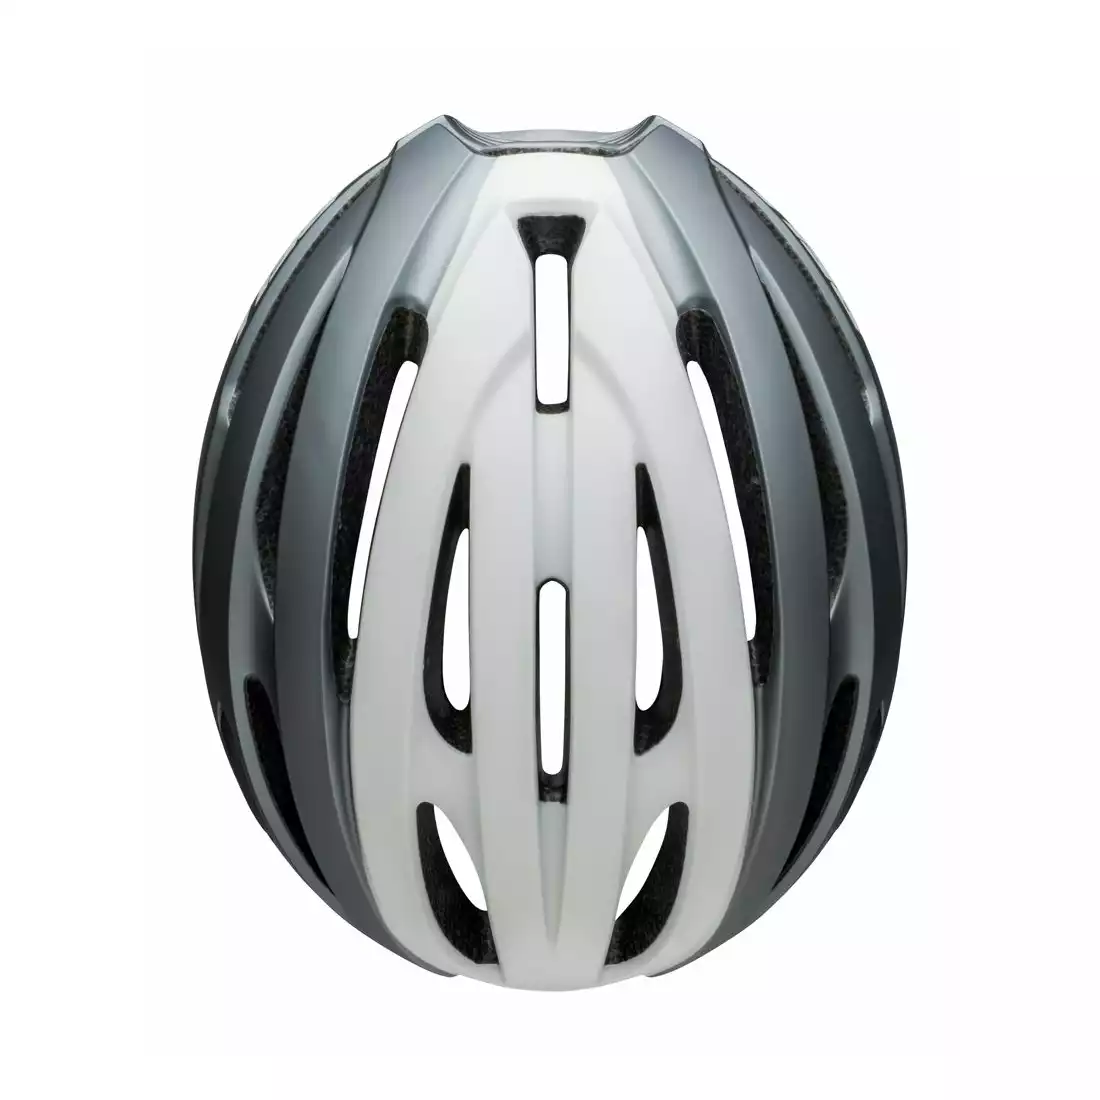 BELL AVENUE INTEGRATED MIPS kask rowerowy szosowy, szary mat